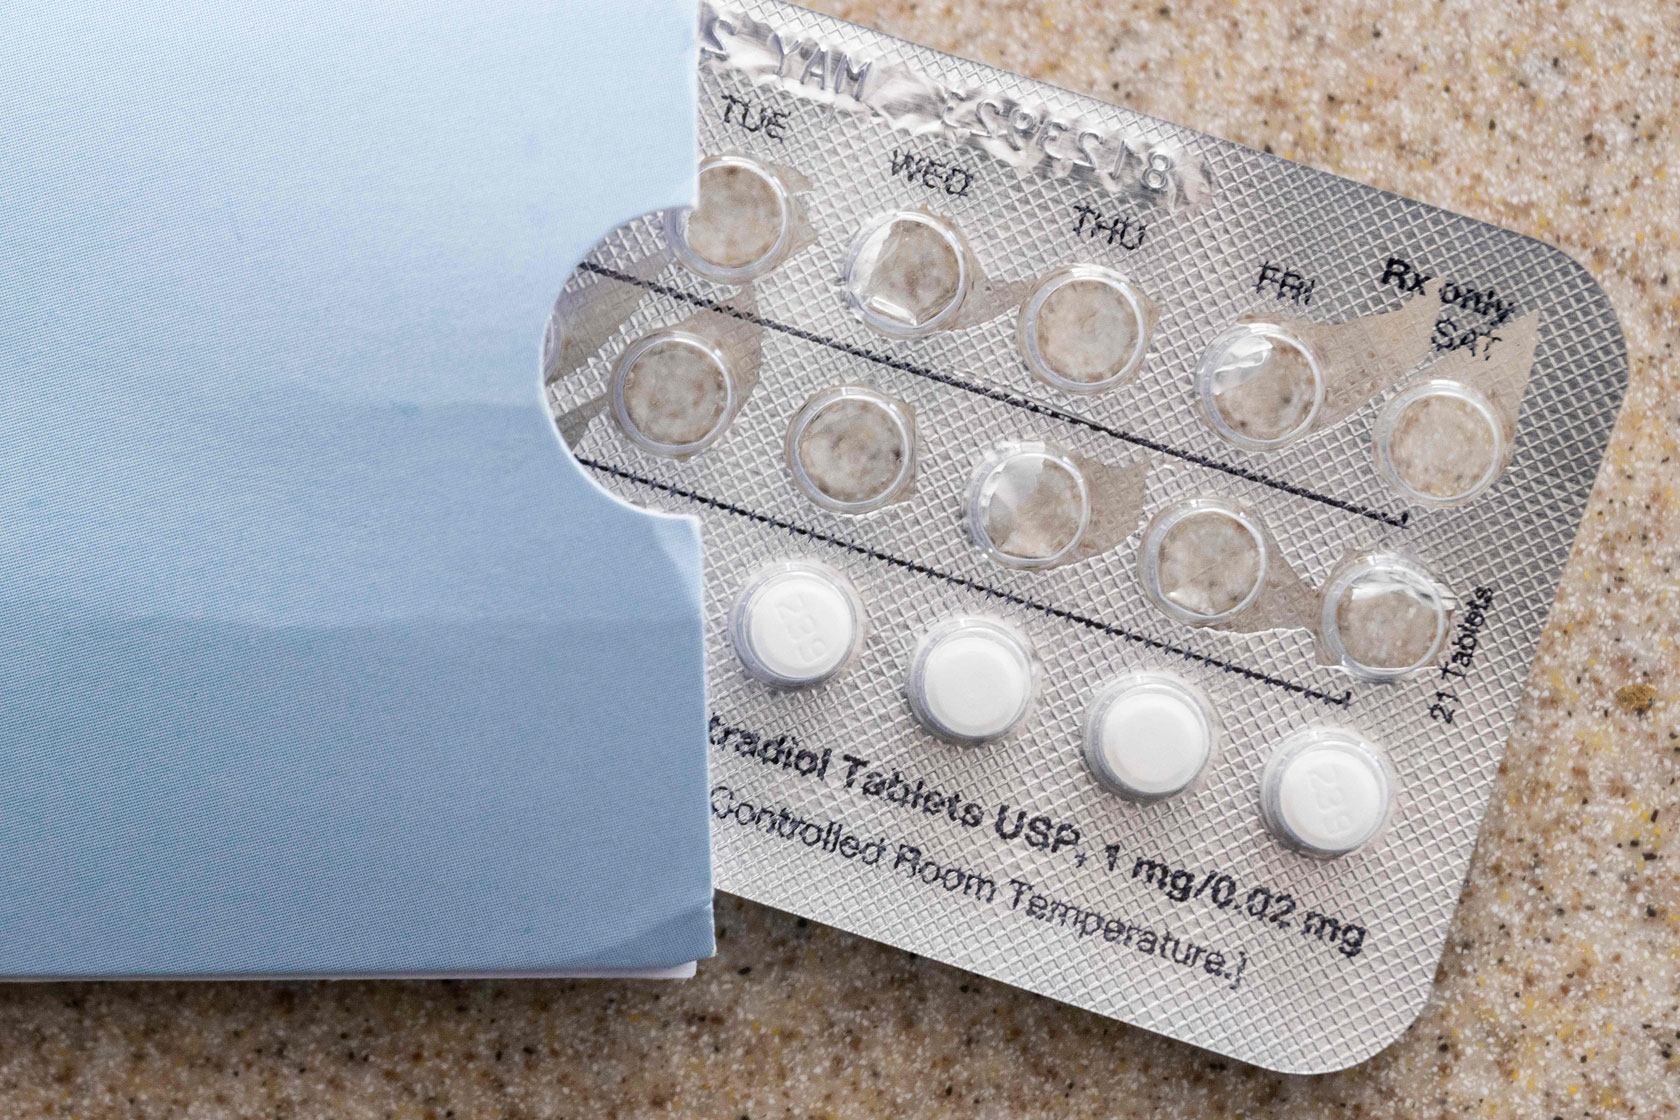 Coming off hormonal birth control: the nutritional support you need